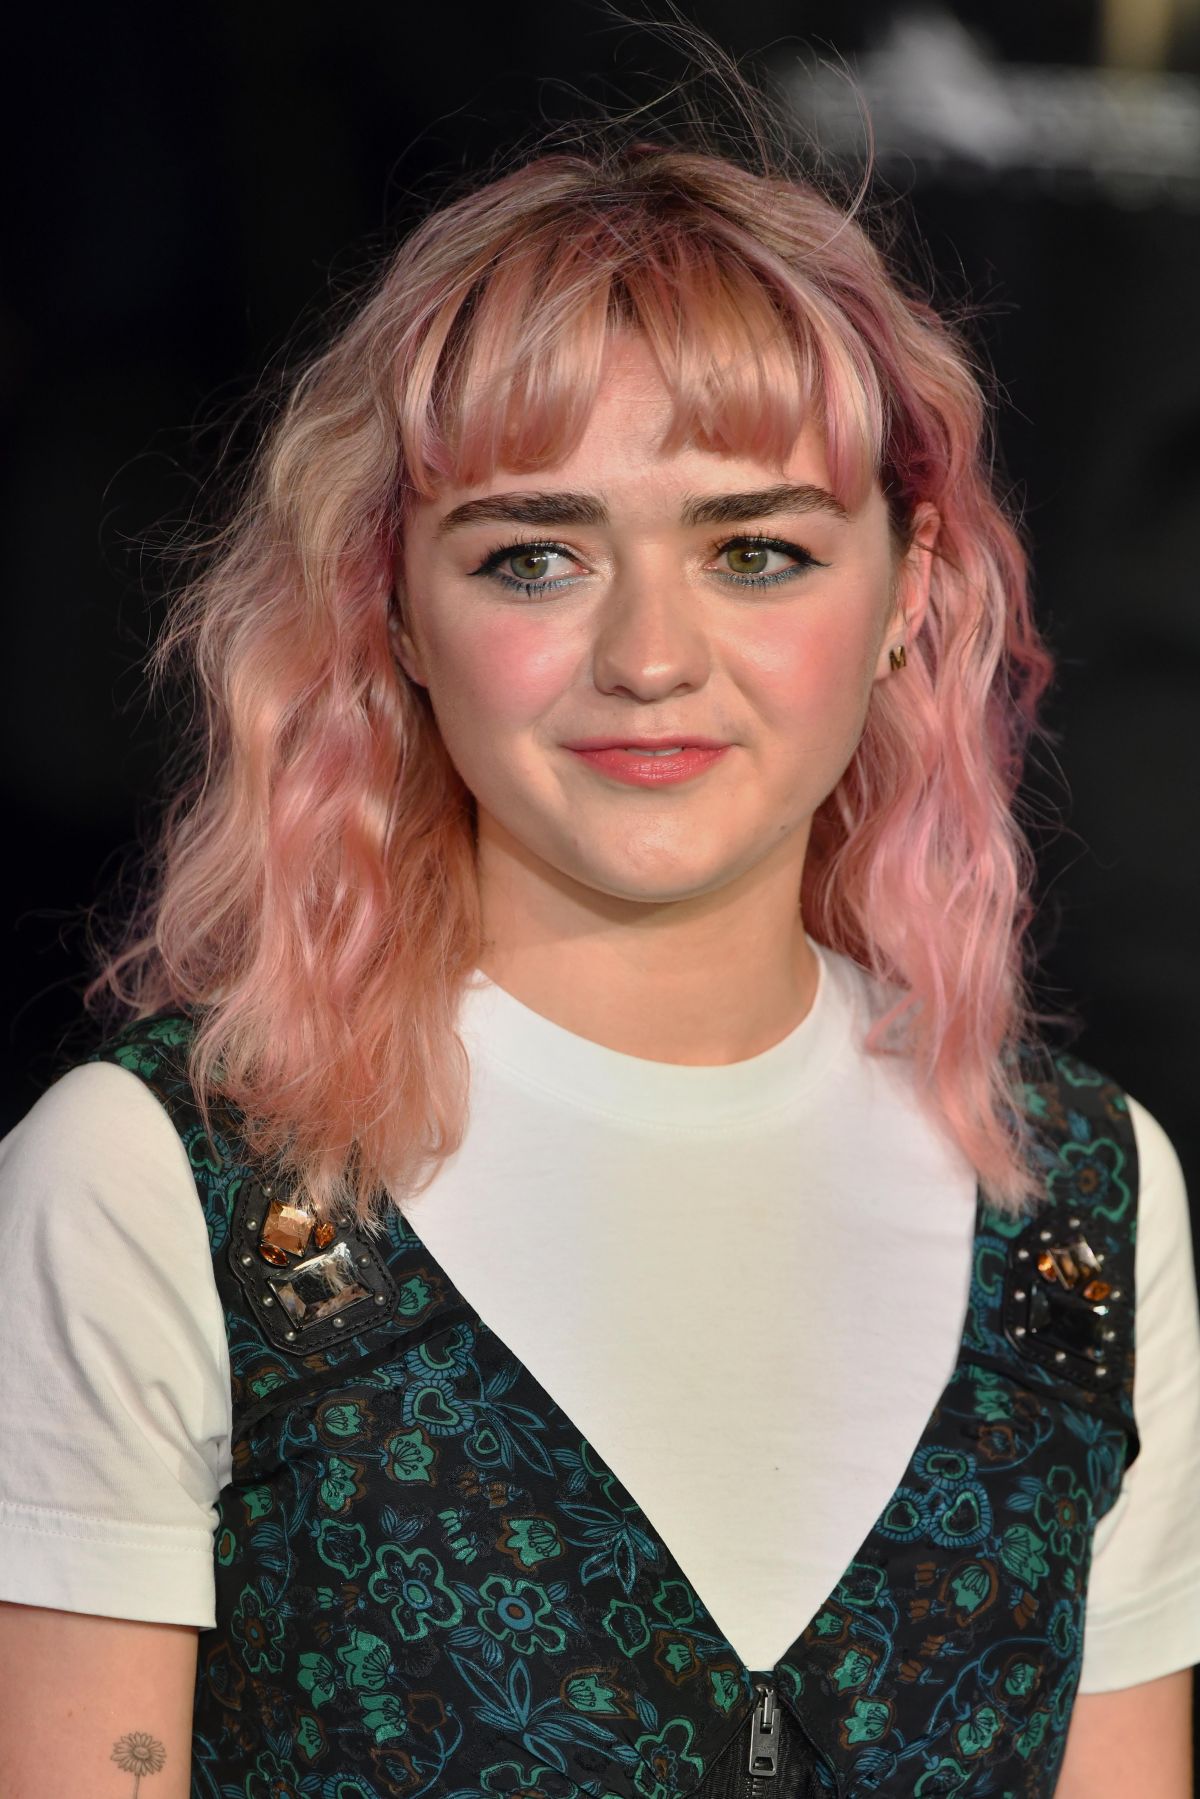 maisie-williams-at-mary-poppins-returns-premiere-in-london-12-12-2018-9.jpg